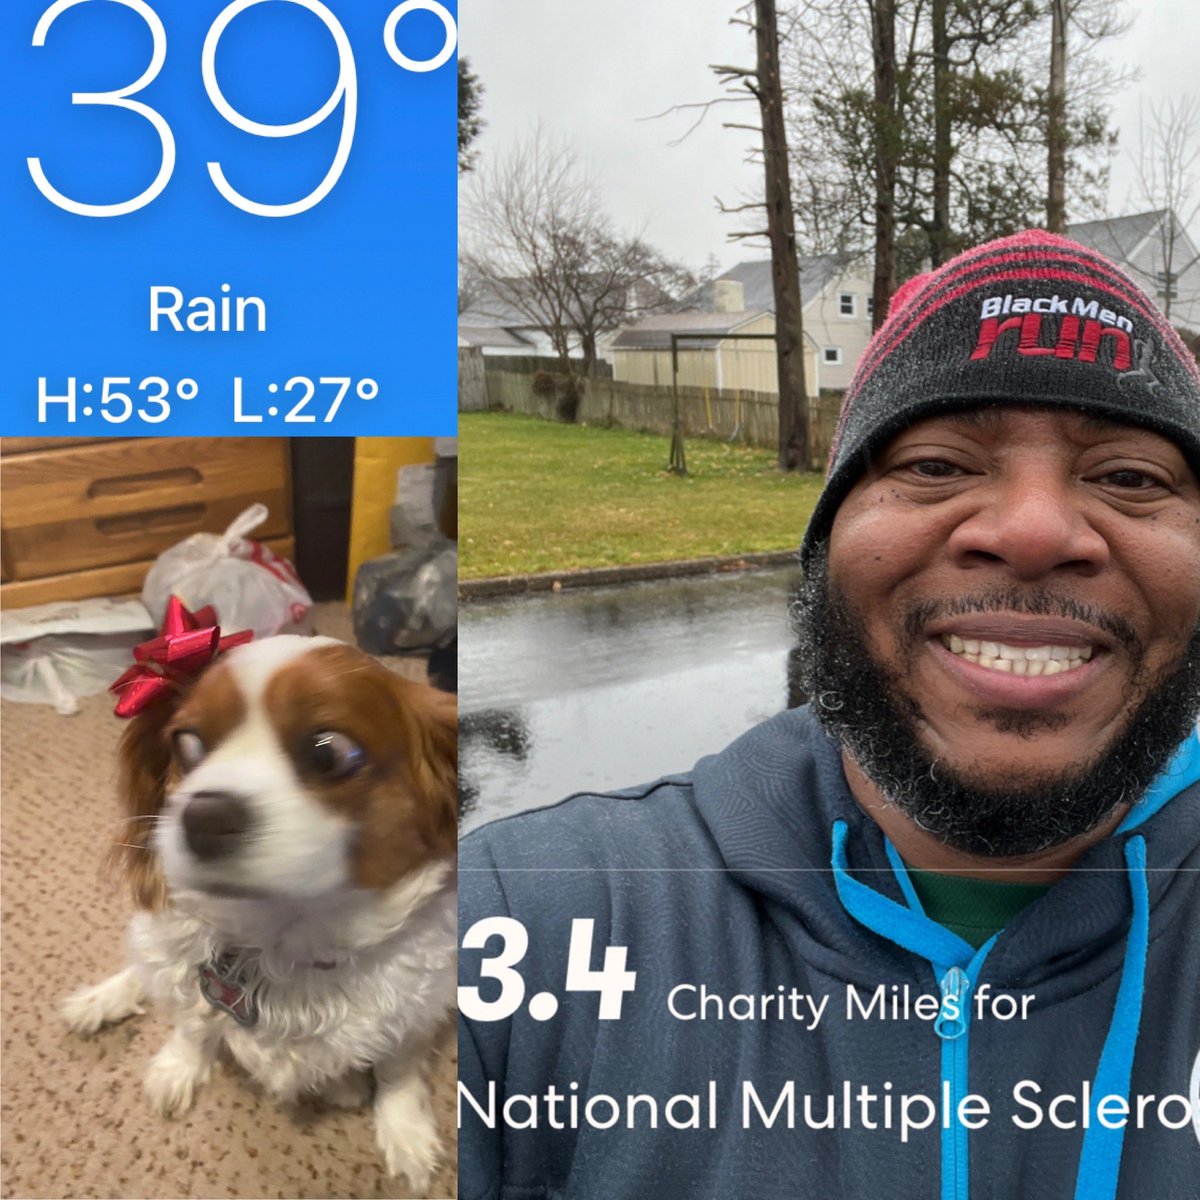 Rainy and cold 5k
Got splashed during the first 1/2mi, guess I had it coming 💦🙄😜
Glad I got outside anyway

#bighomieonthemove #bmrphilly #teamordinary #runforgood